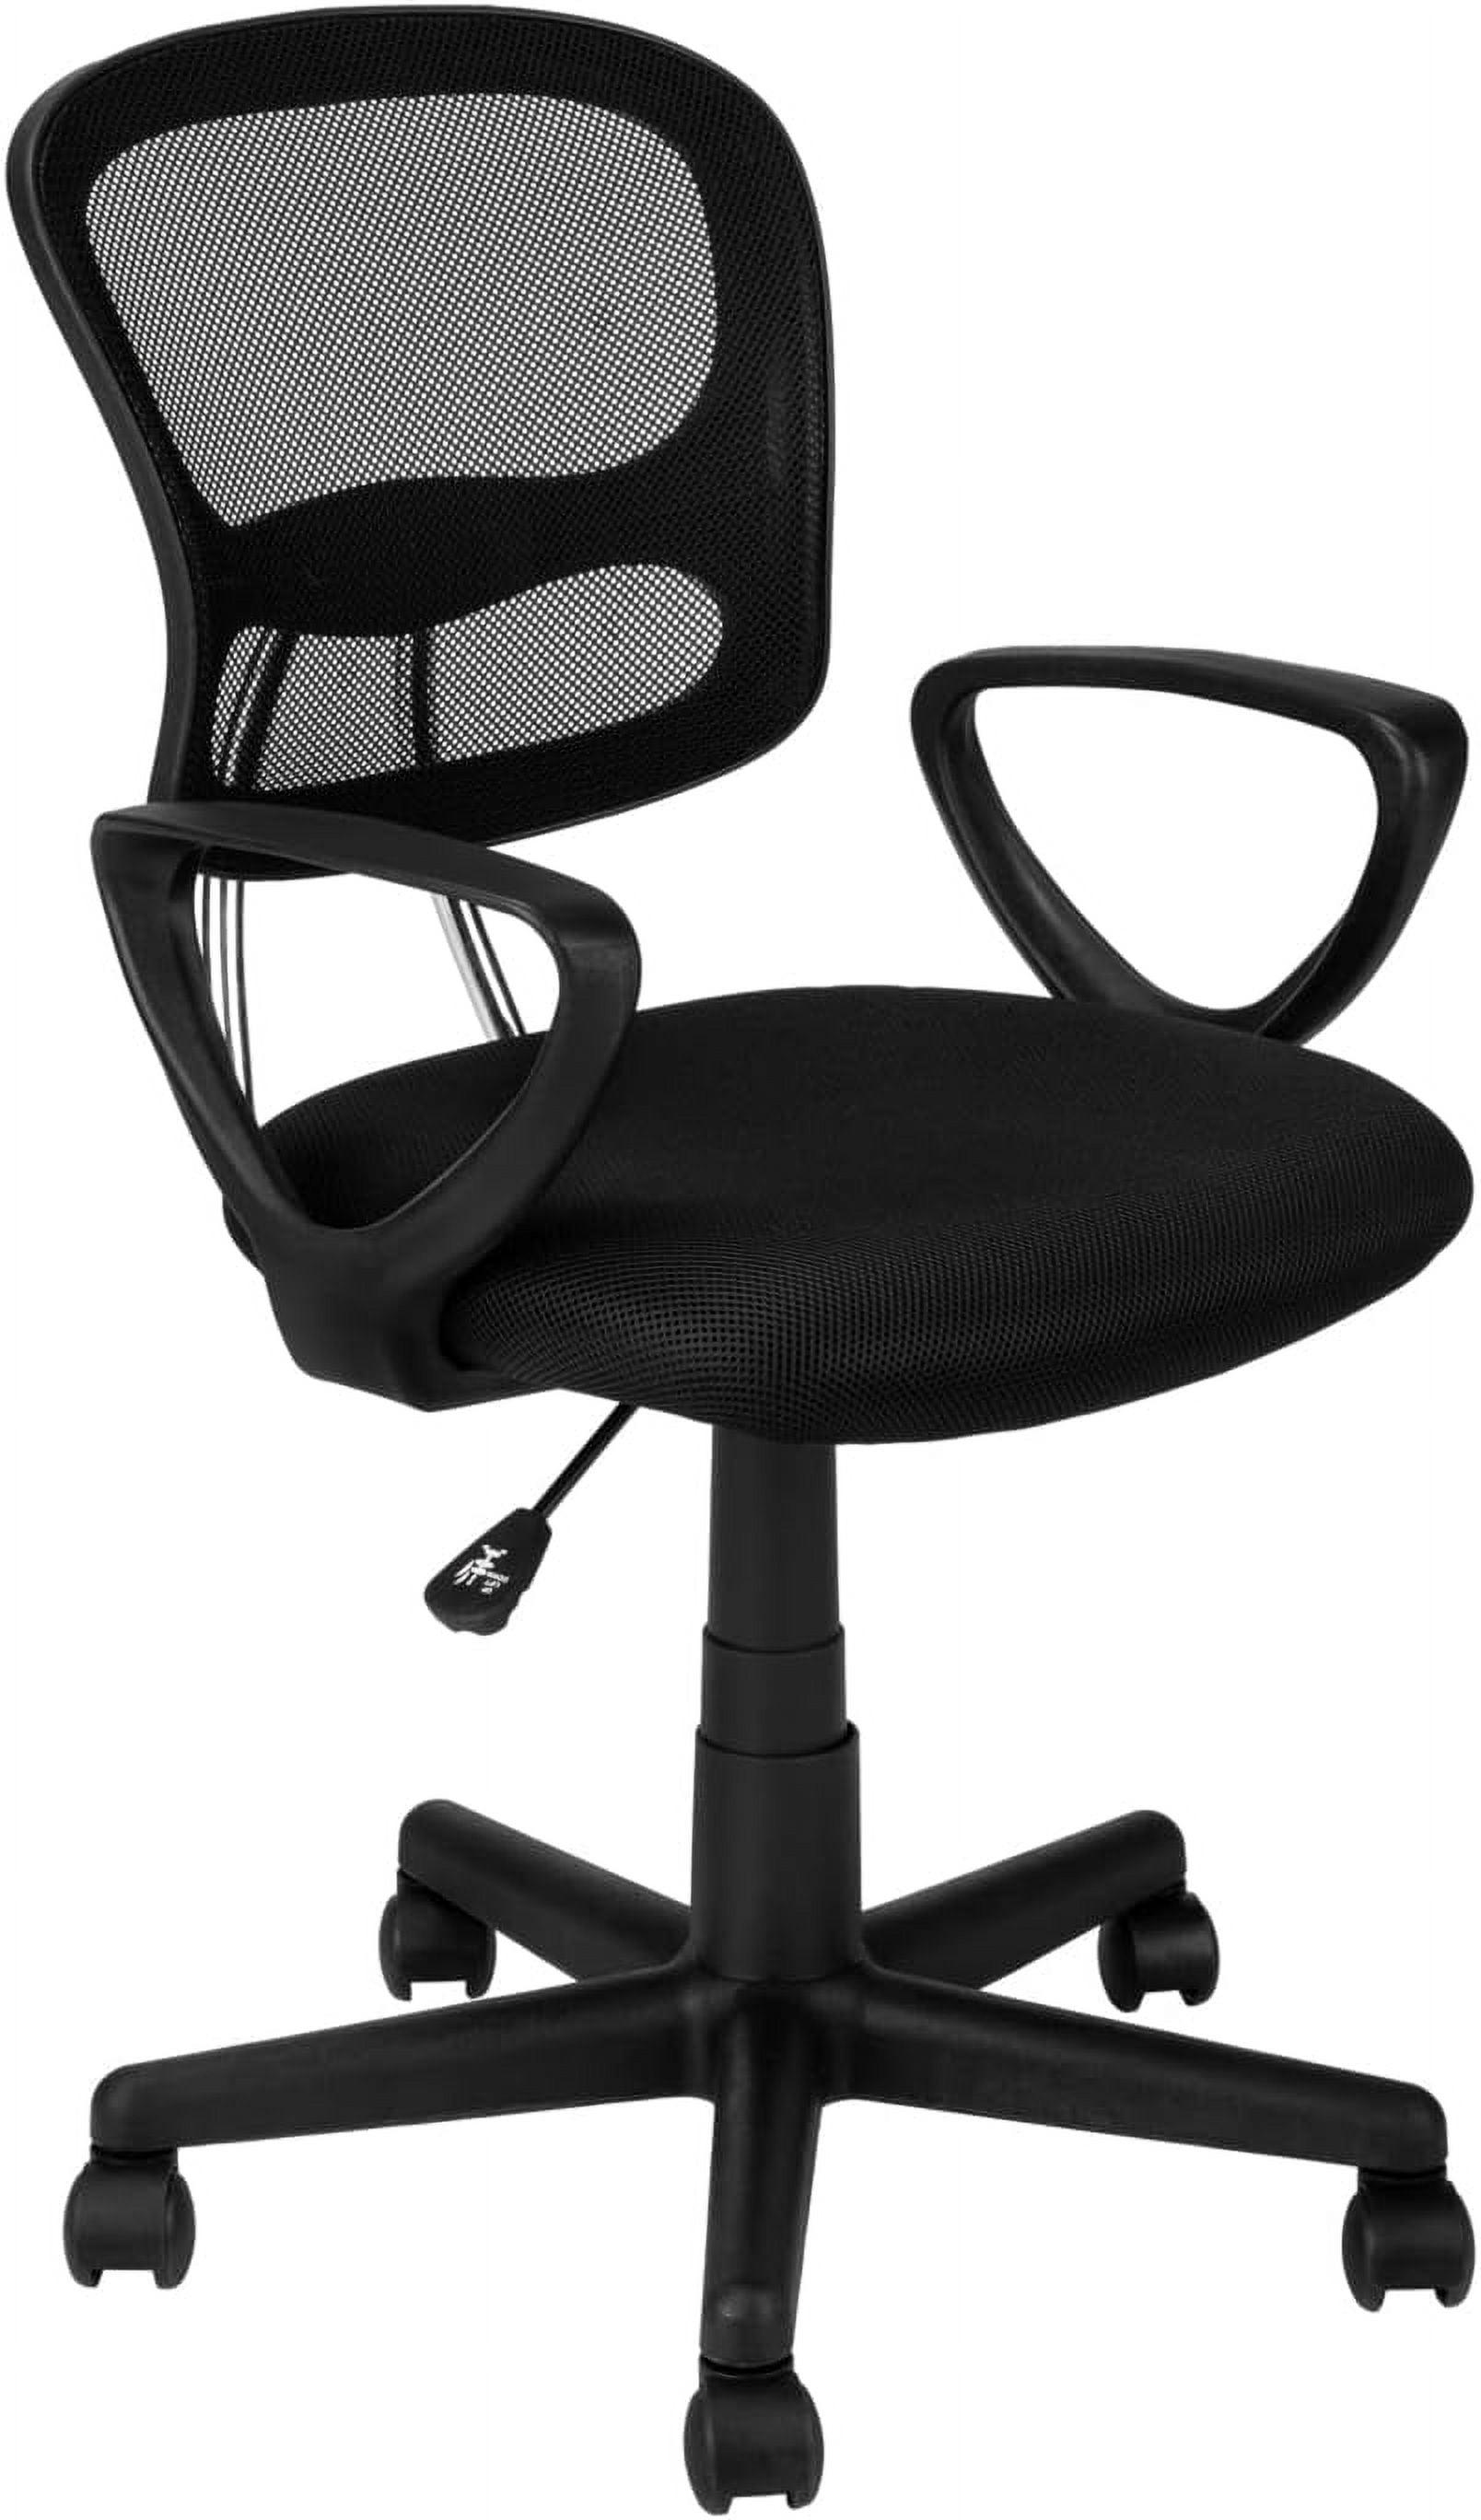 Contemporary Black Mesh Swivel Arm Chair with Adjustable Height